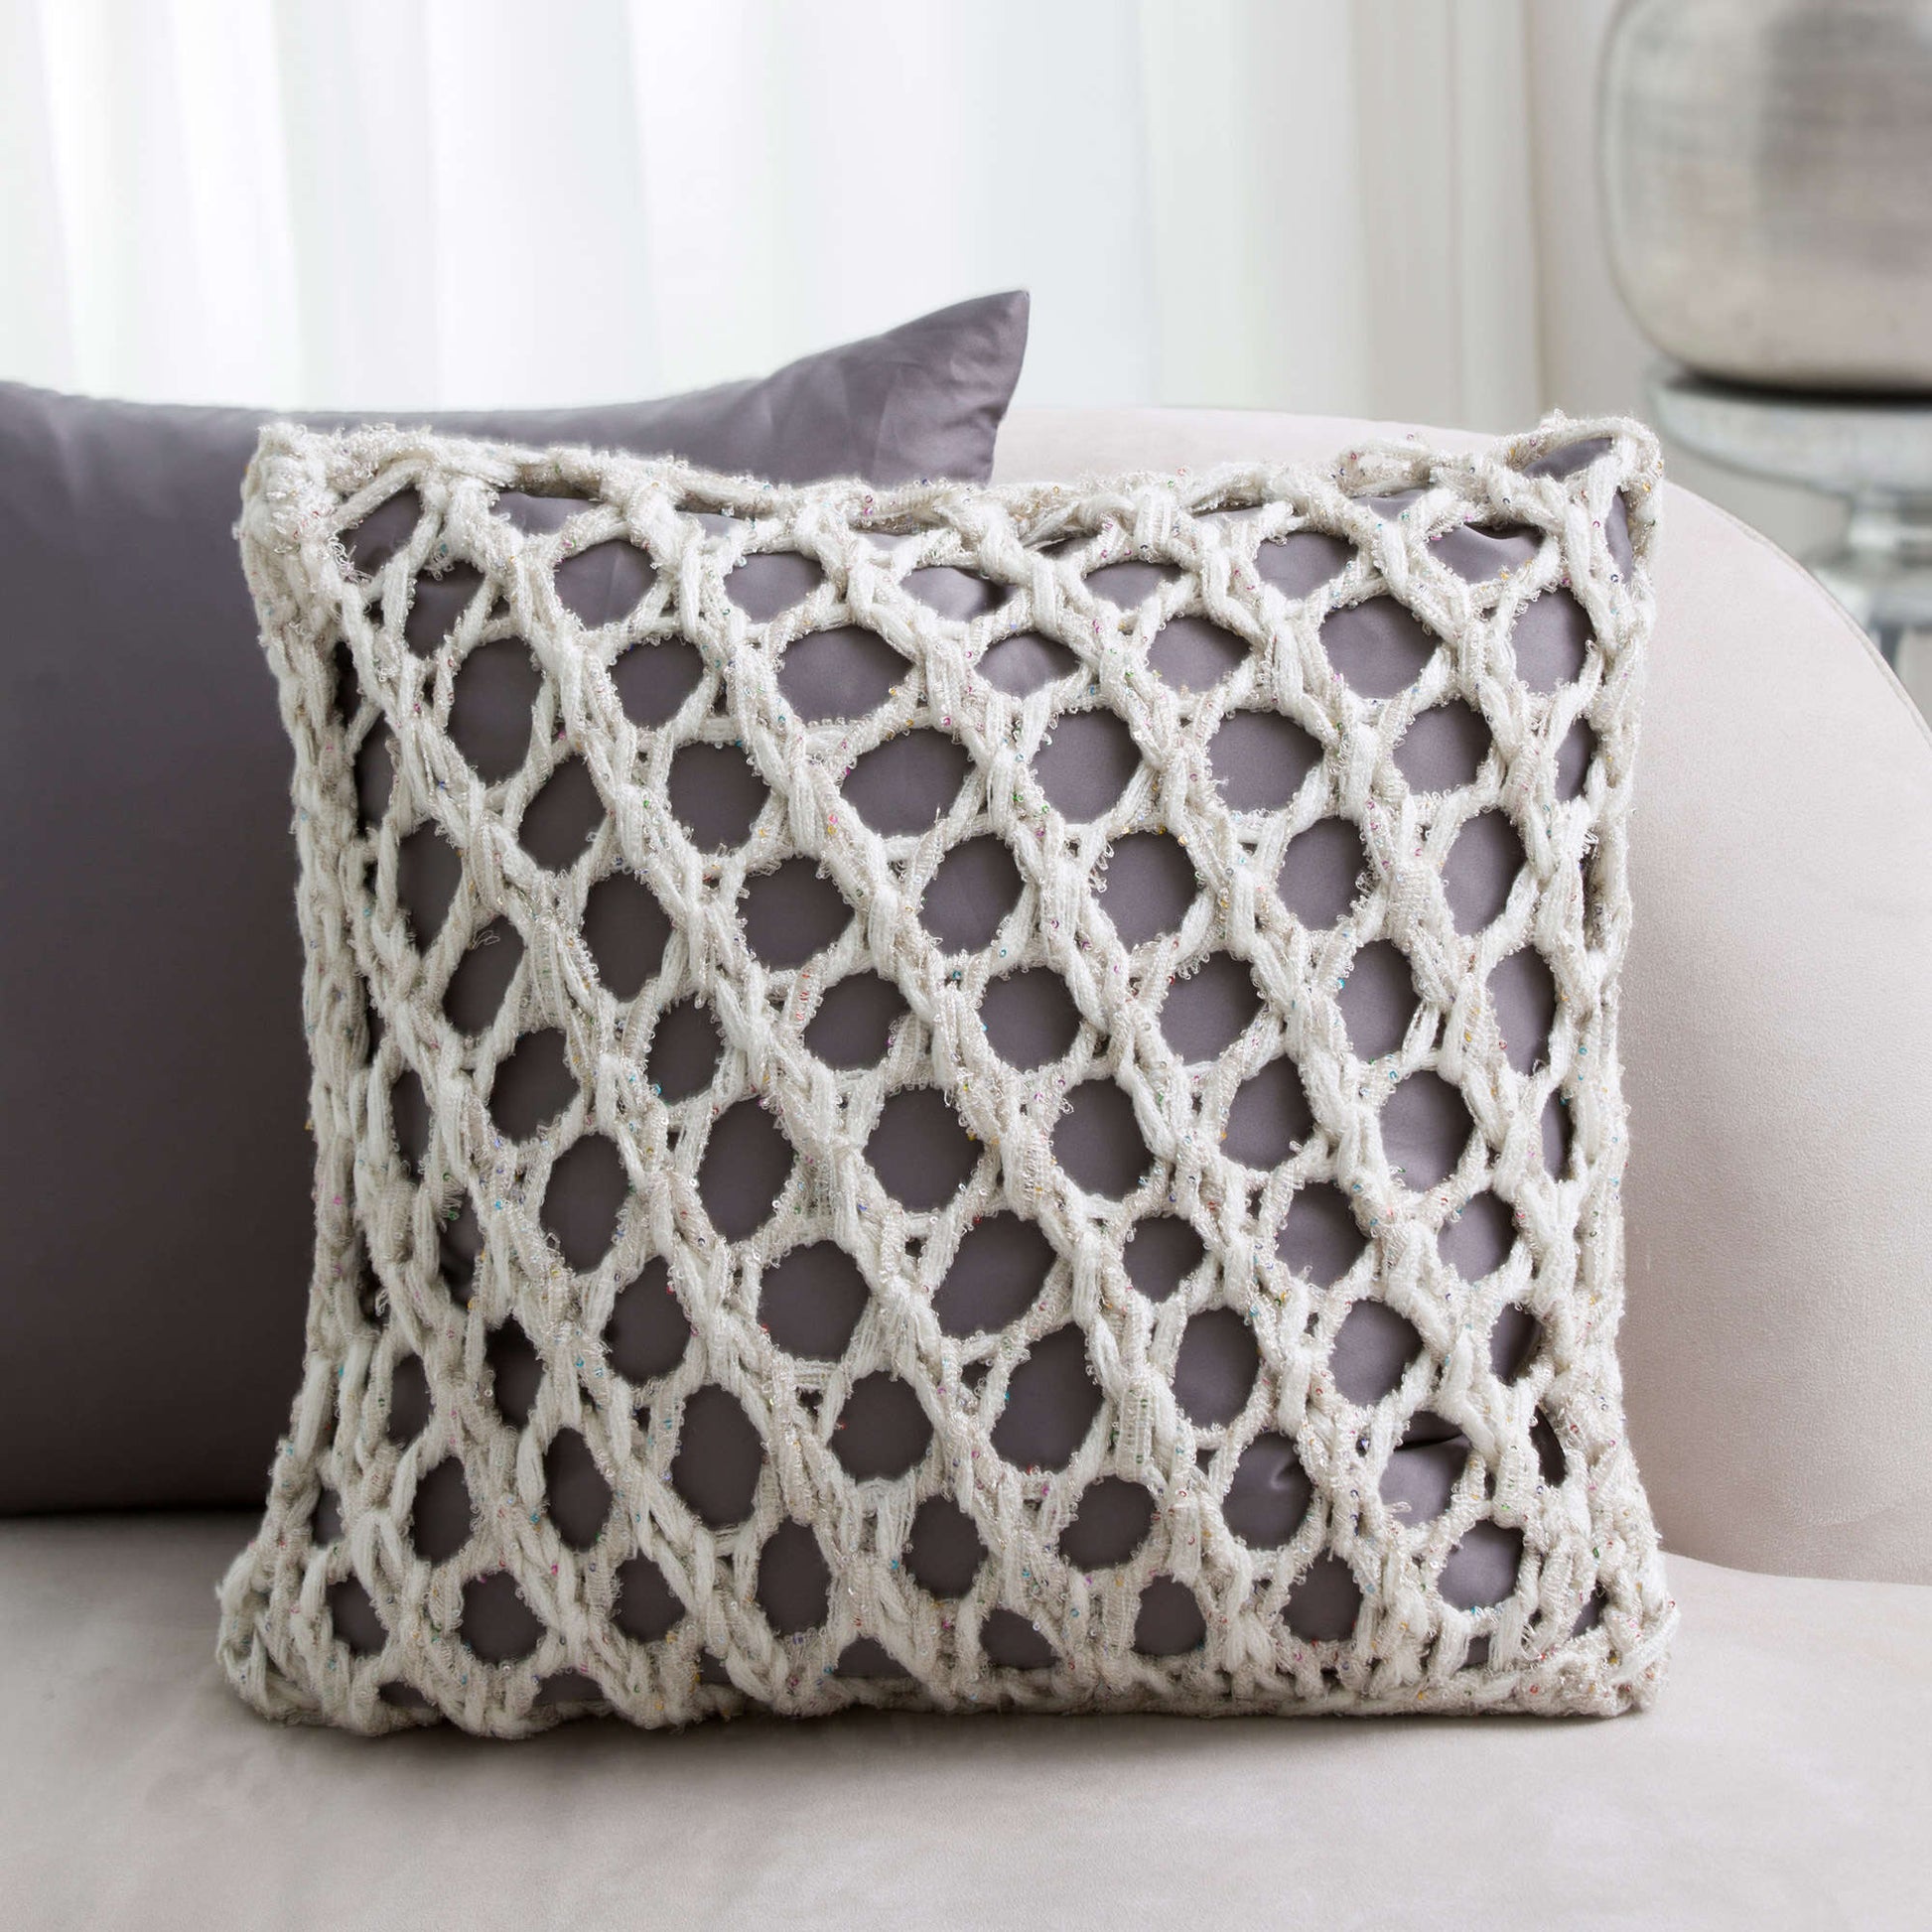 Red Heart Mesh Pillow Cover Pattern Pattern